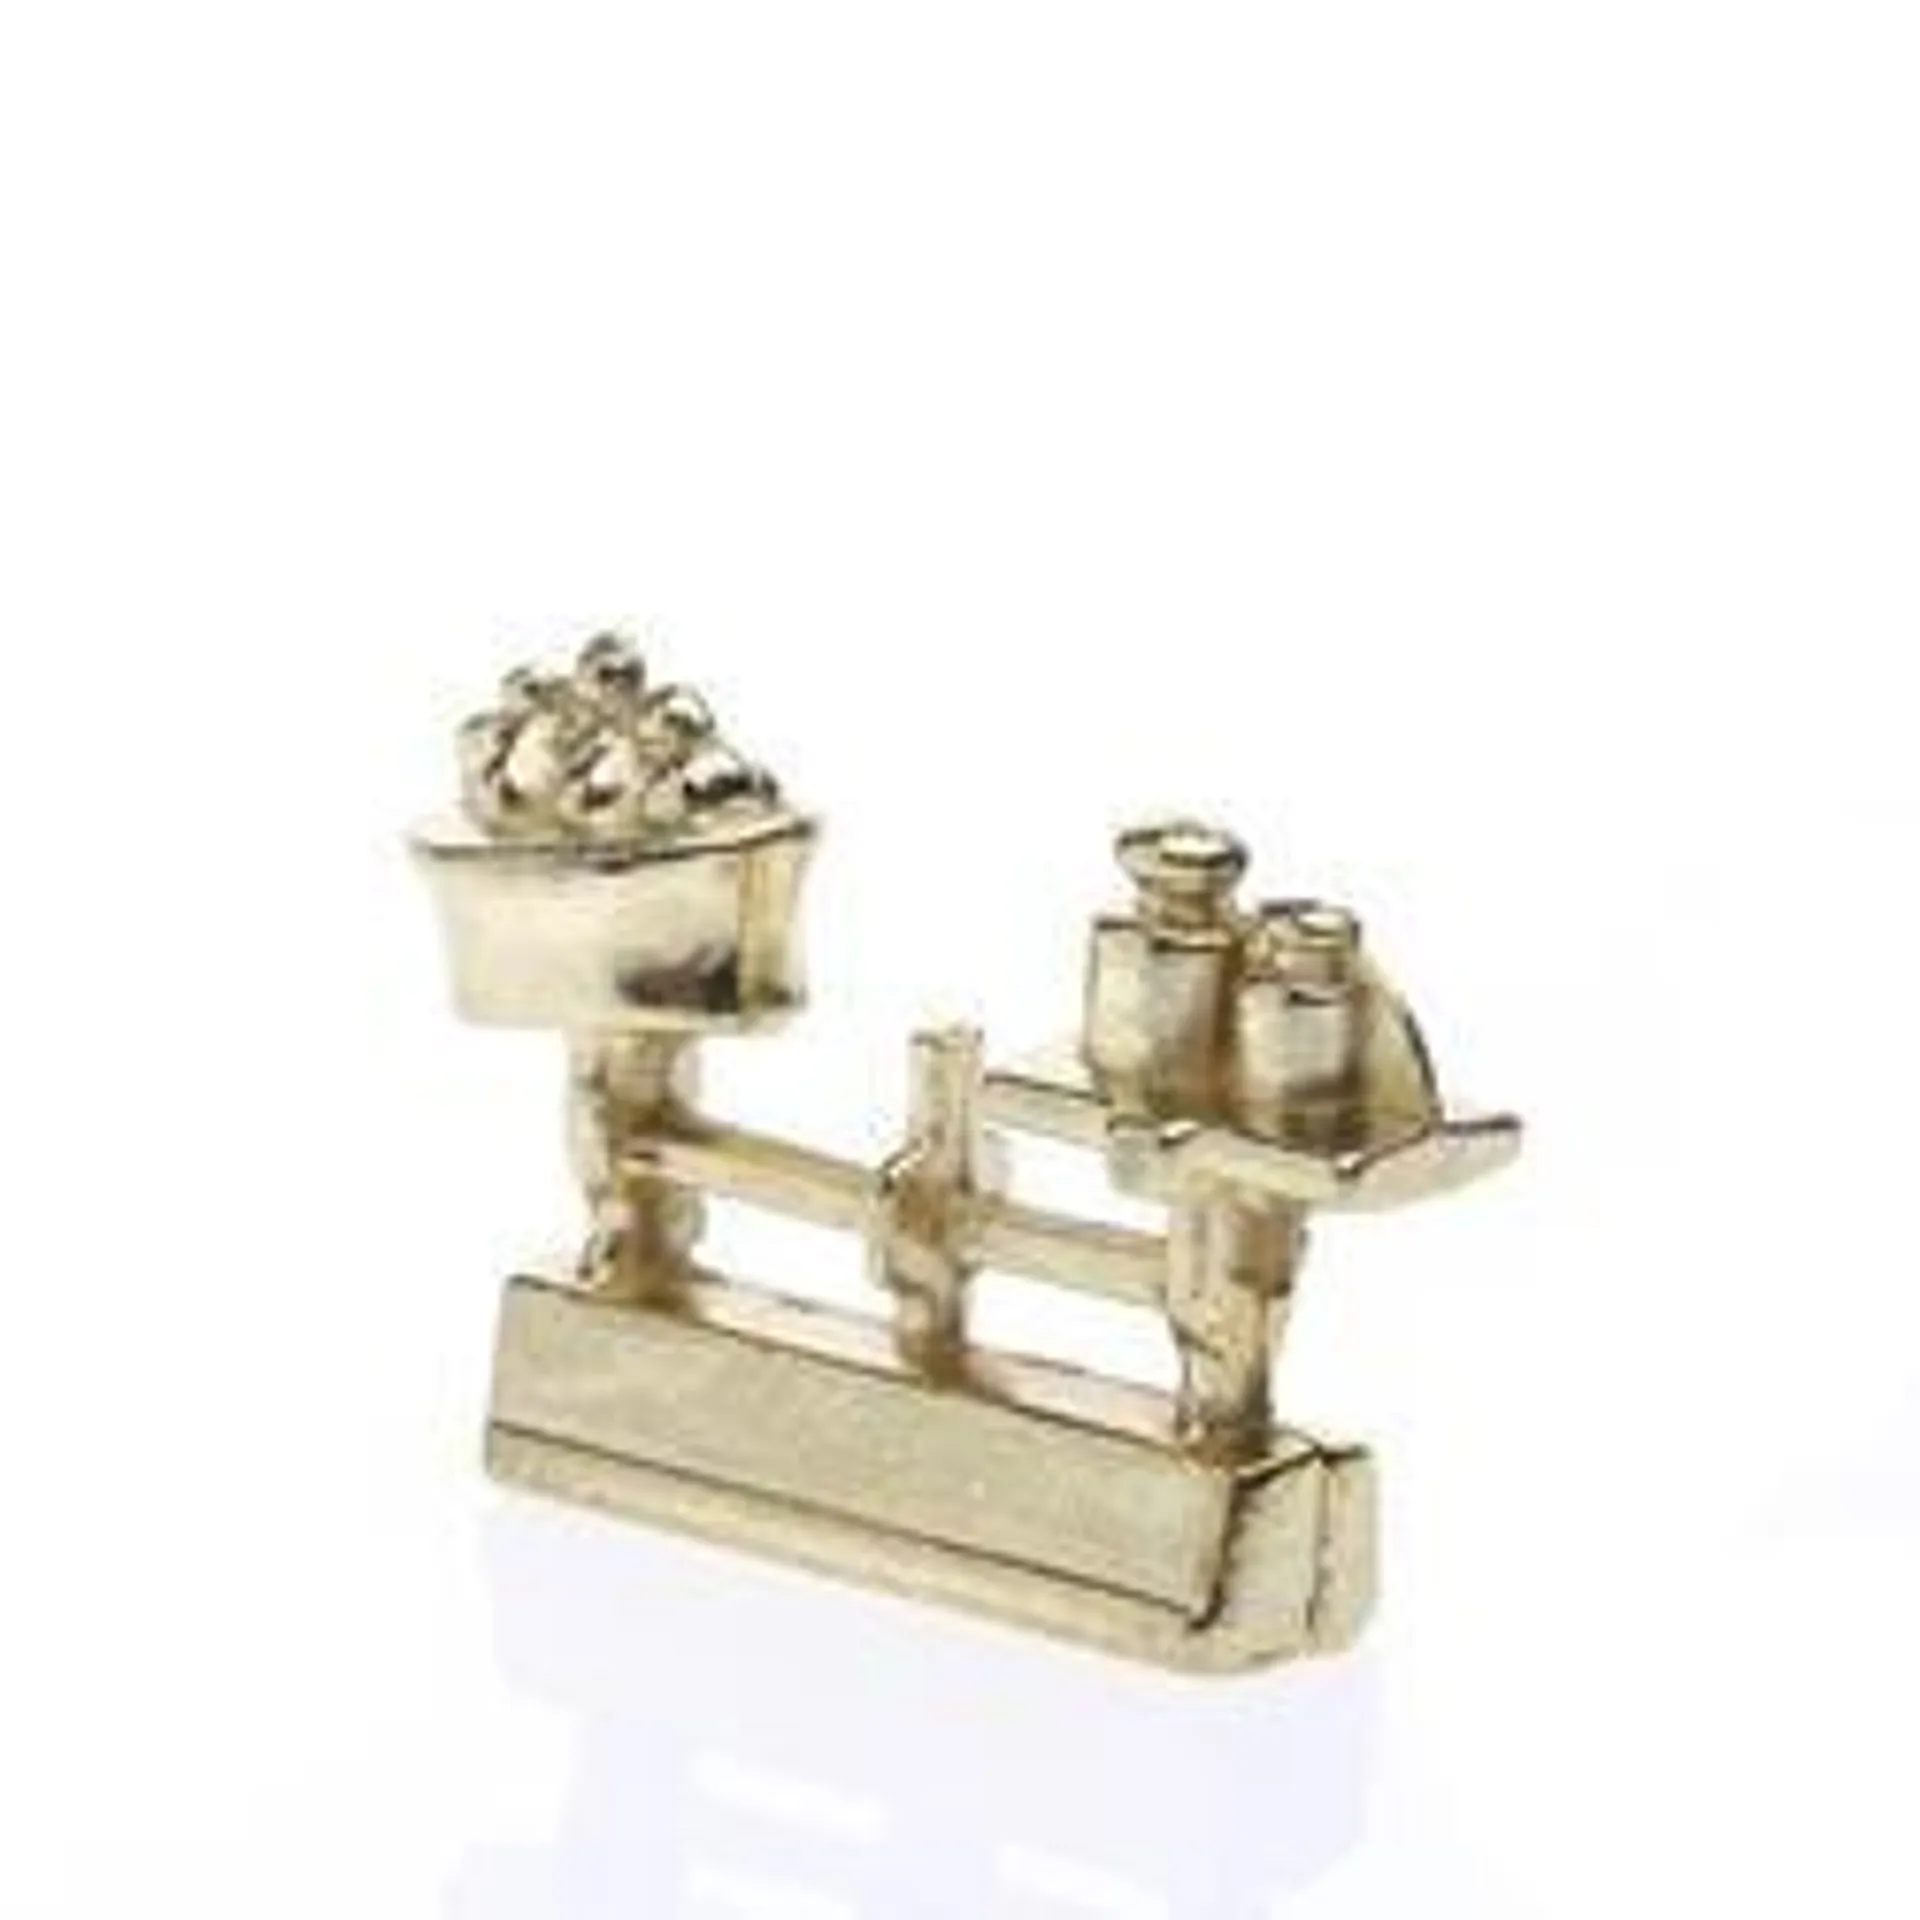 1:12 - 1" Scale Miniature Brass Bakers Scale